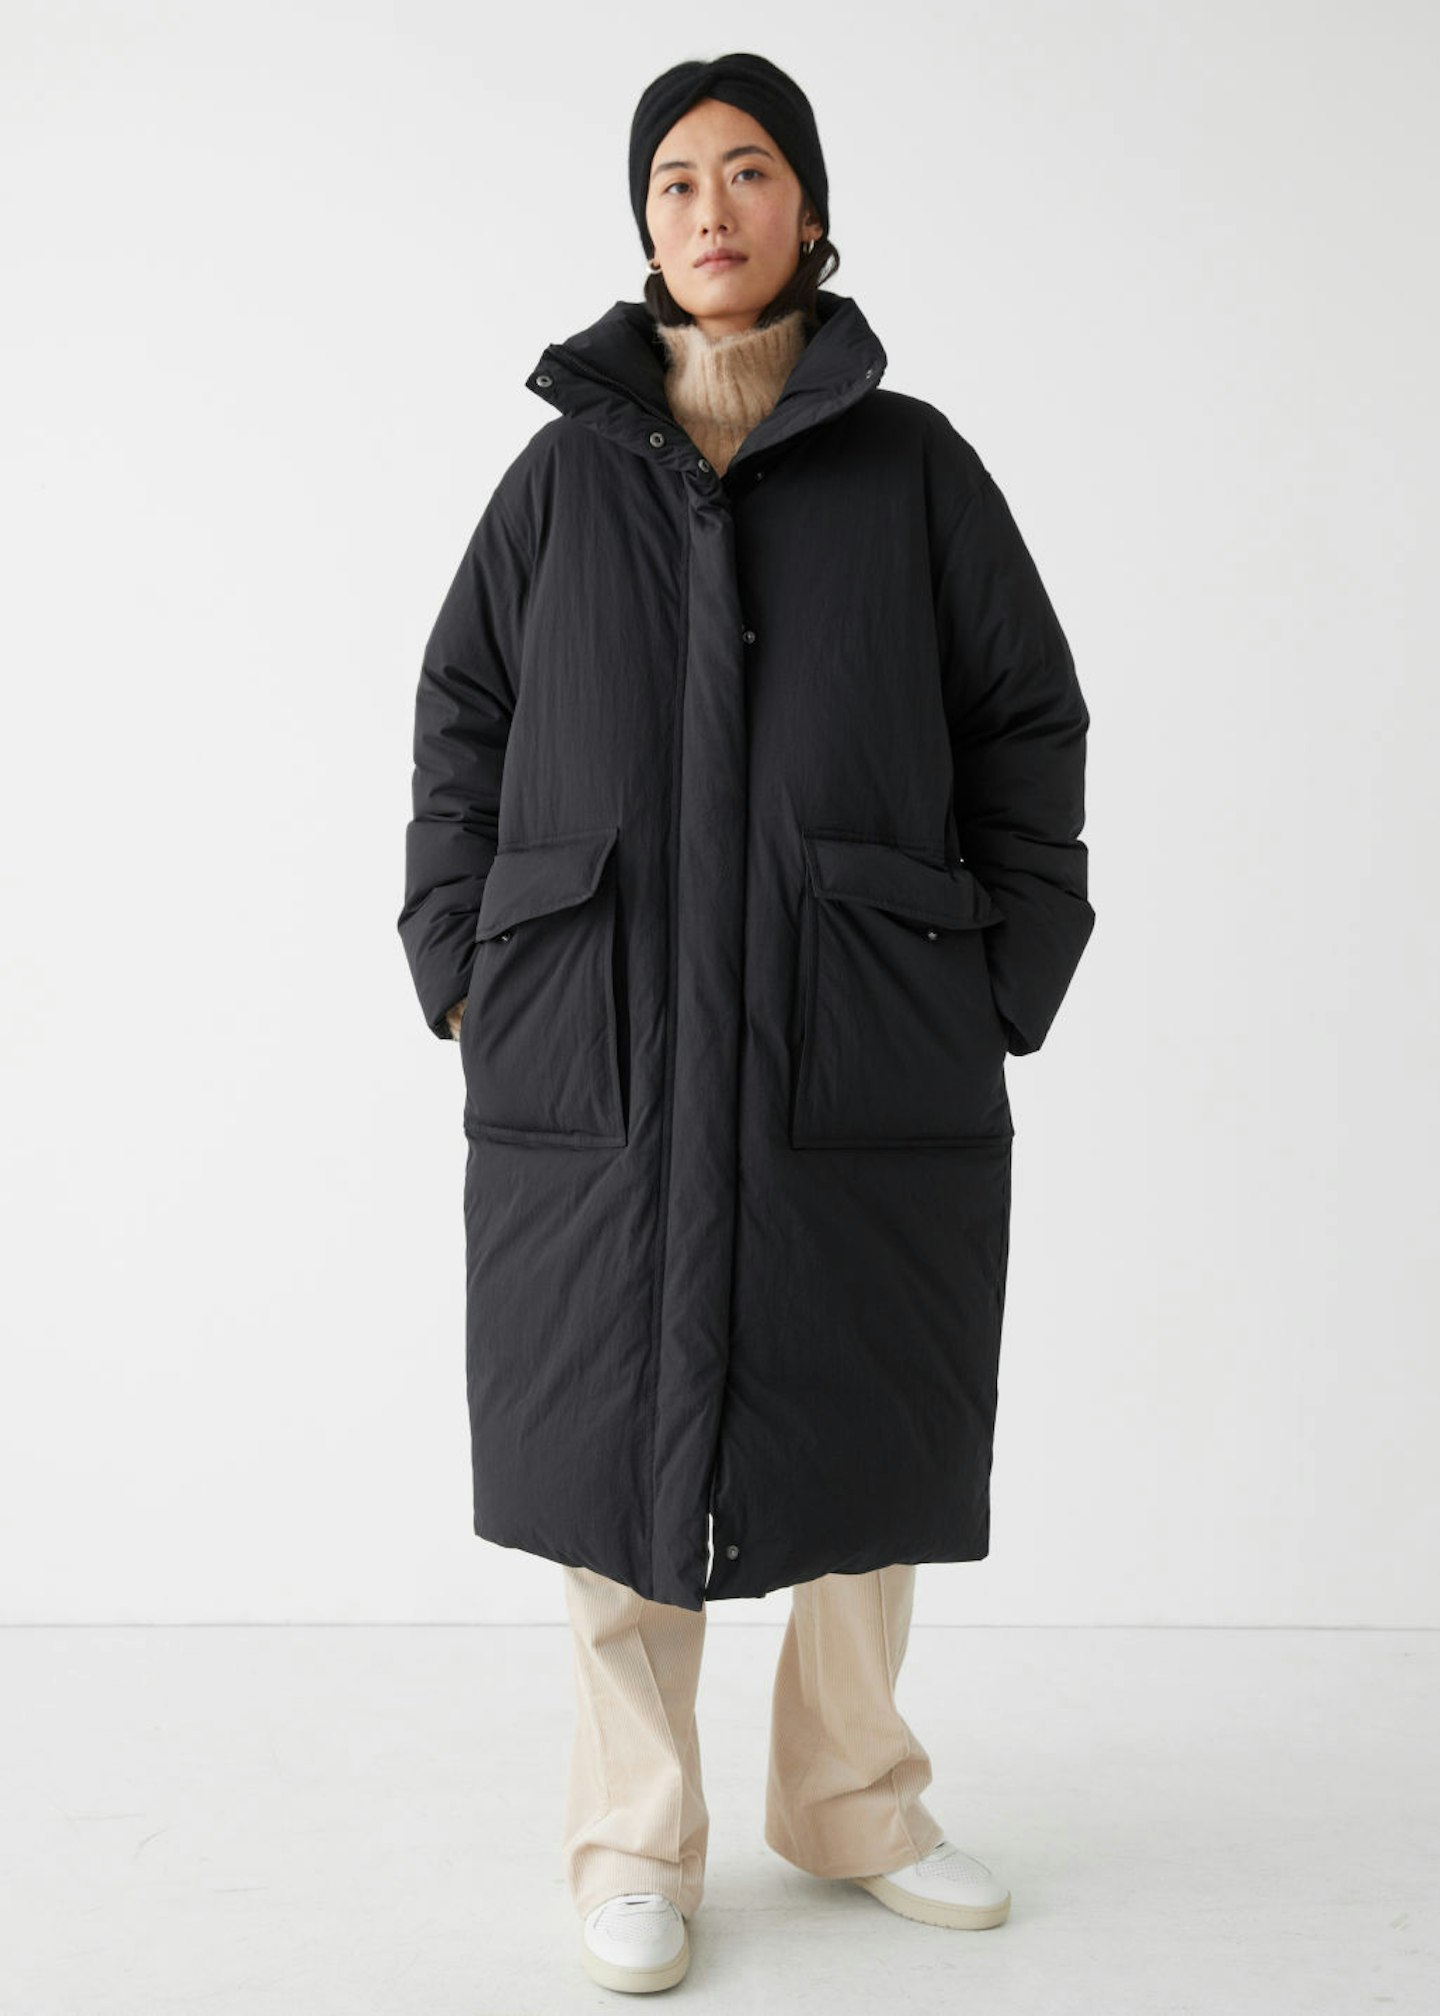 & Other Stories, Straight Down Coat, £205